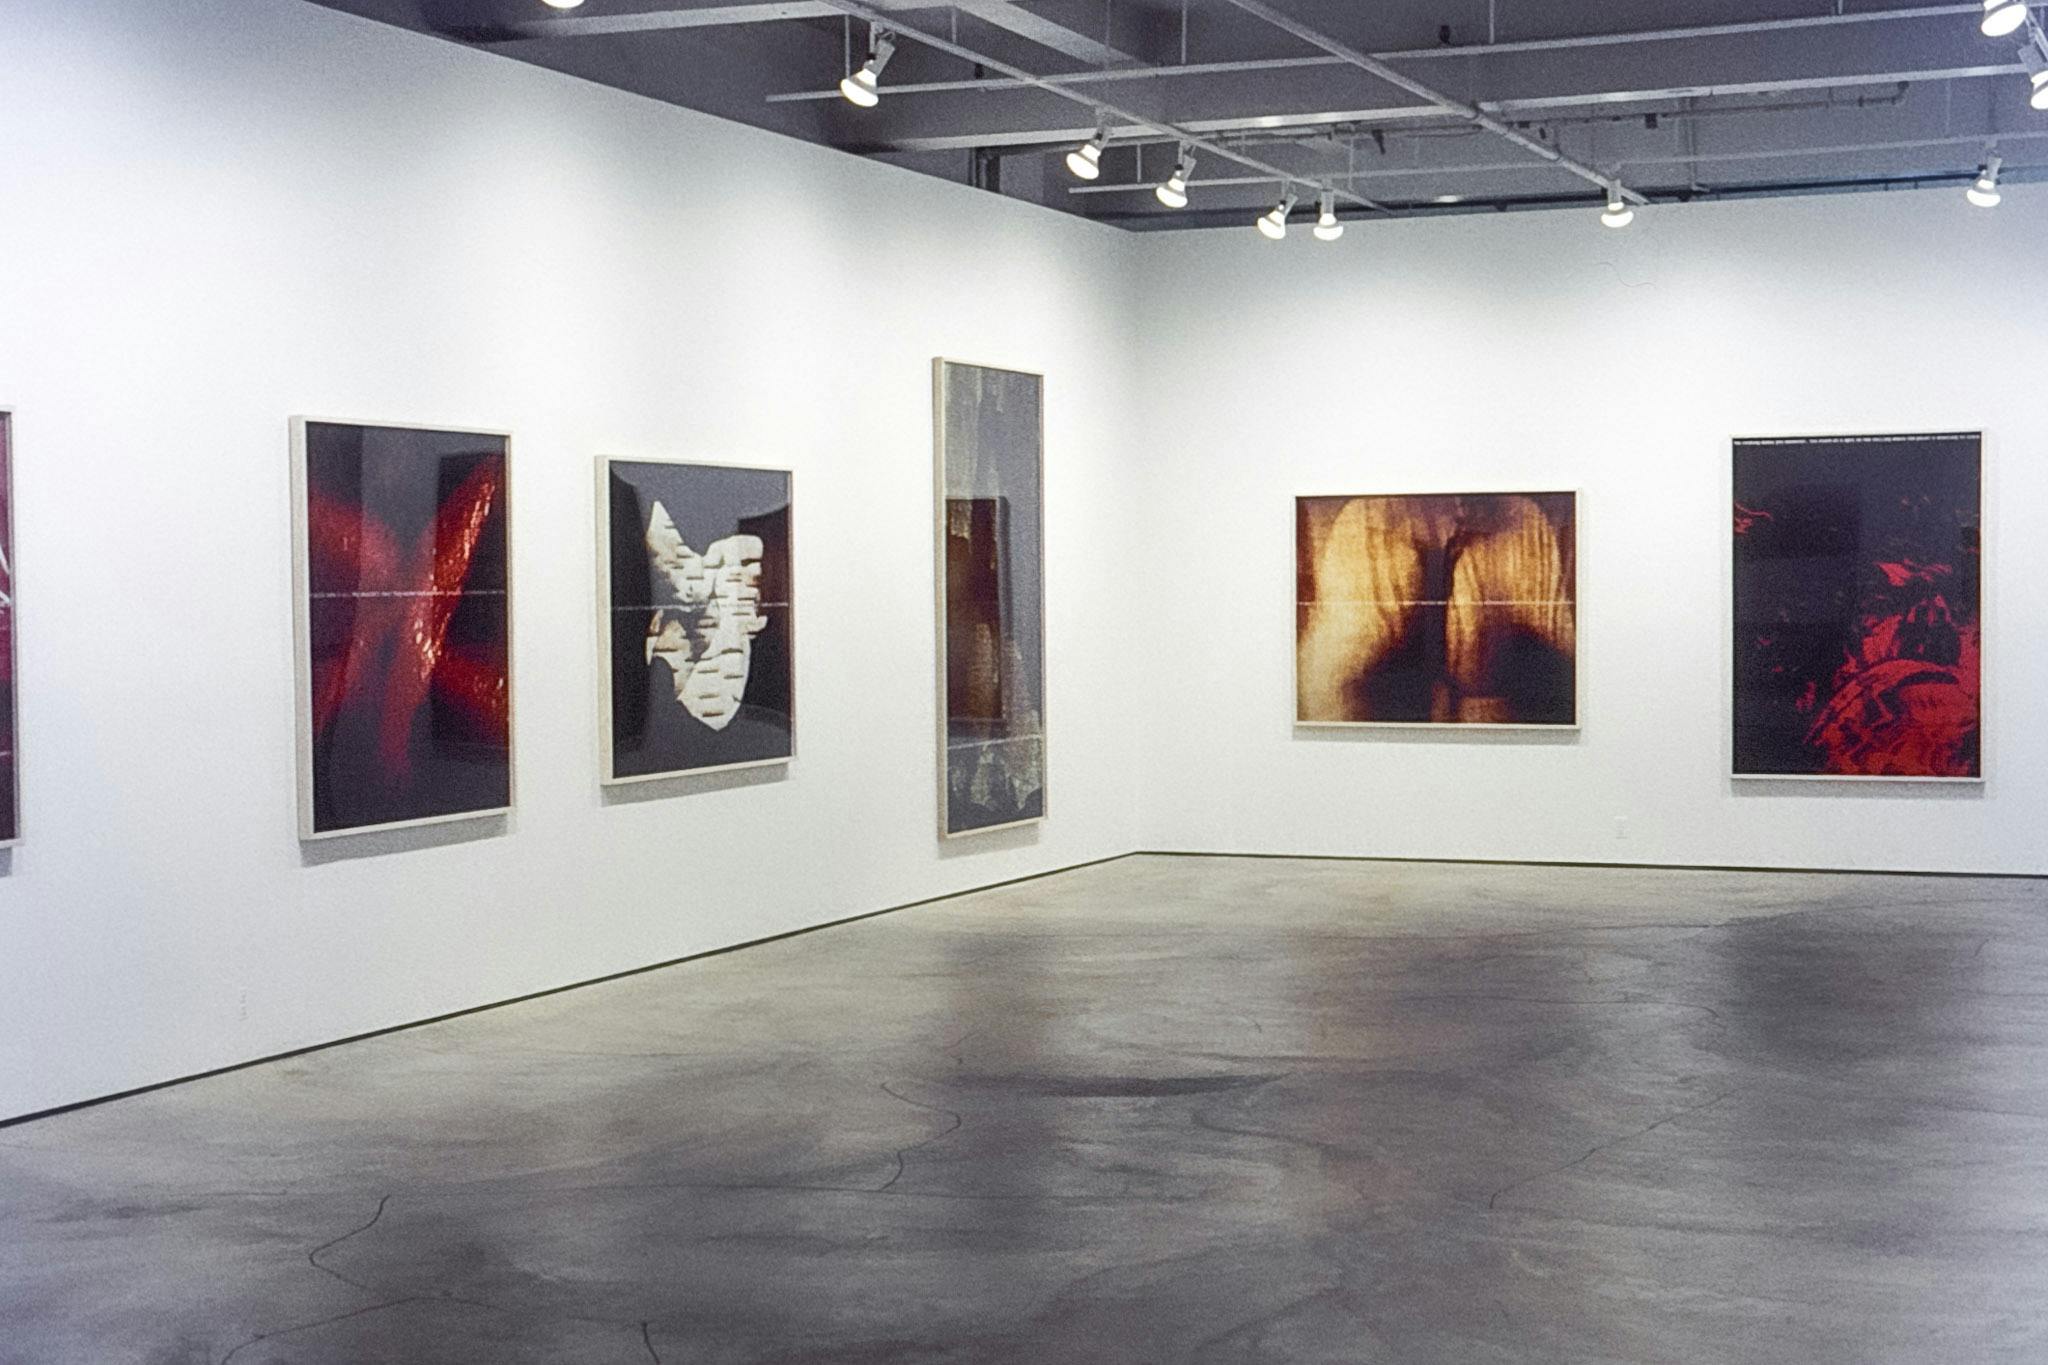 Five artworks mounted on two gallery walls. Two of the pieces have red organic shapes on black background. The second piece from the right captures a figure that resembles a bent naked human torso.